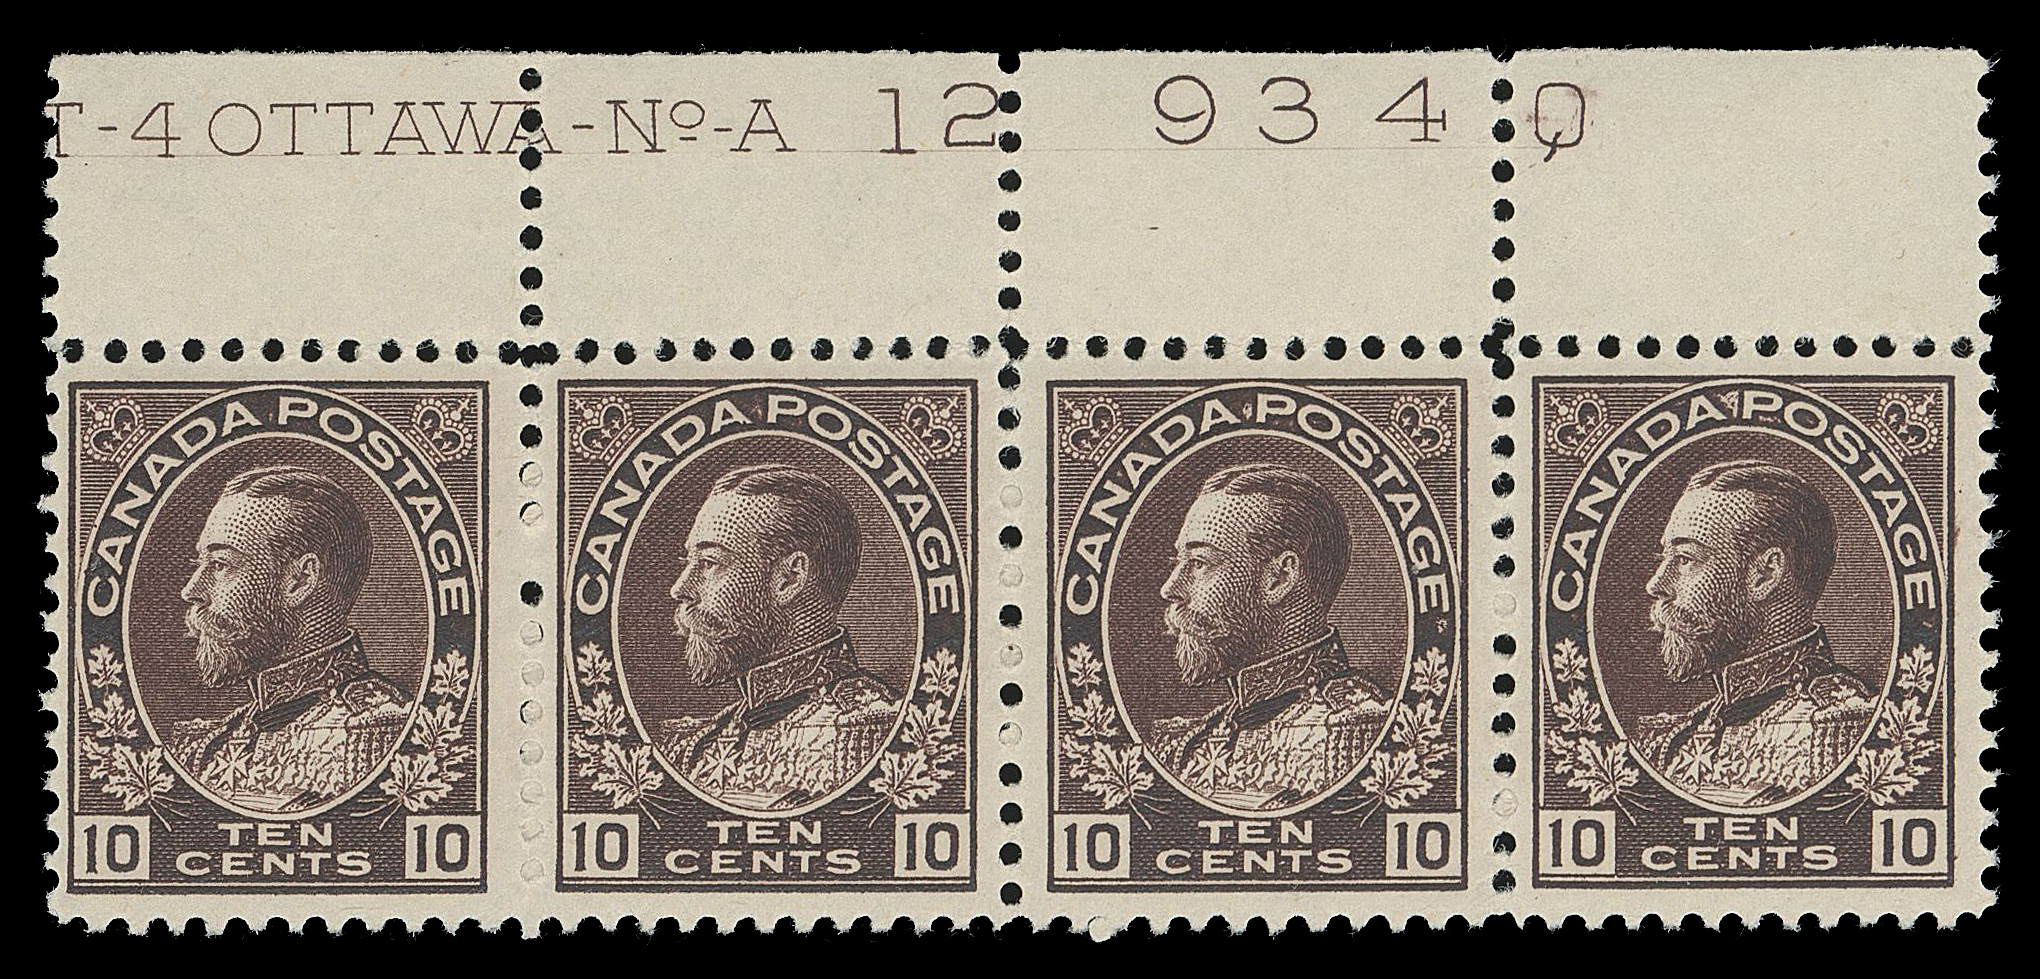 ADMIRAL STAMPS  116,A post office fresh Plate 12 strip of four, deep rich colour, reasonably centered with full original gum; appealing and scarce, F-VF NH (Unitrade cat. $2,880)